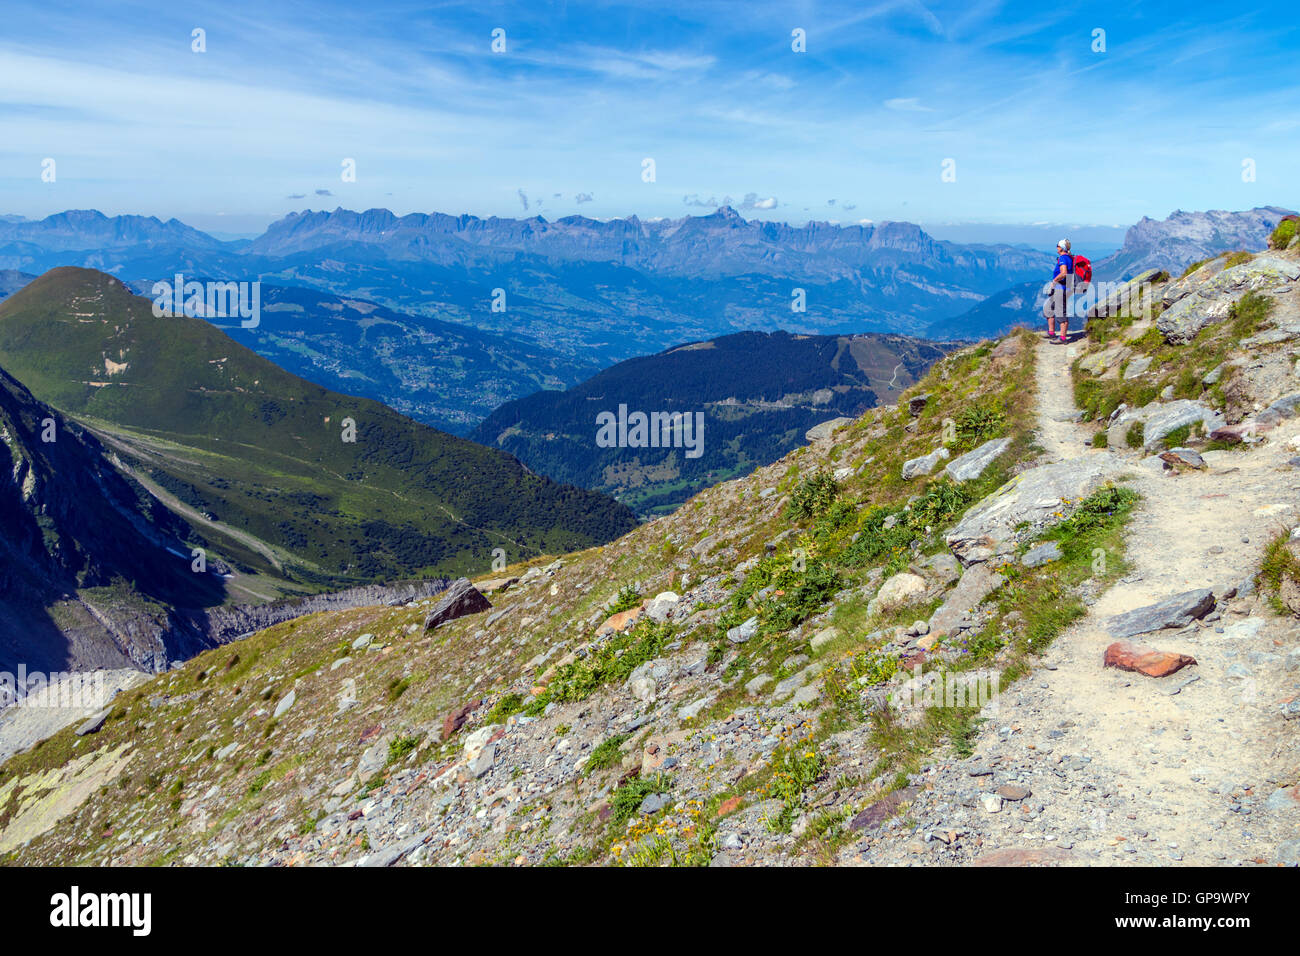 Female hiker takes in the view, Nid d'Aigle, Chamonix, France Stock Photo